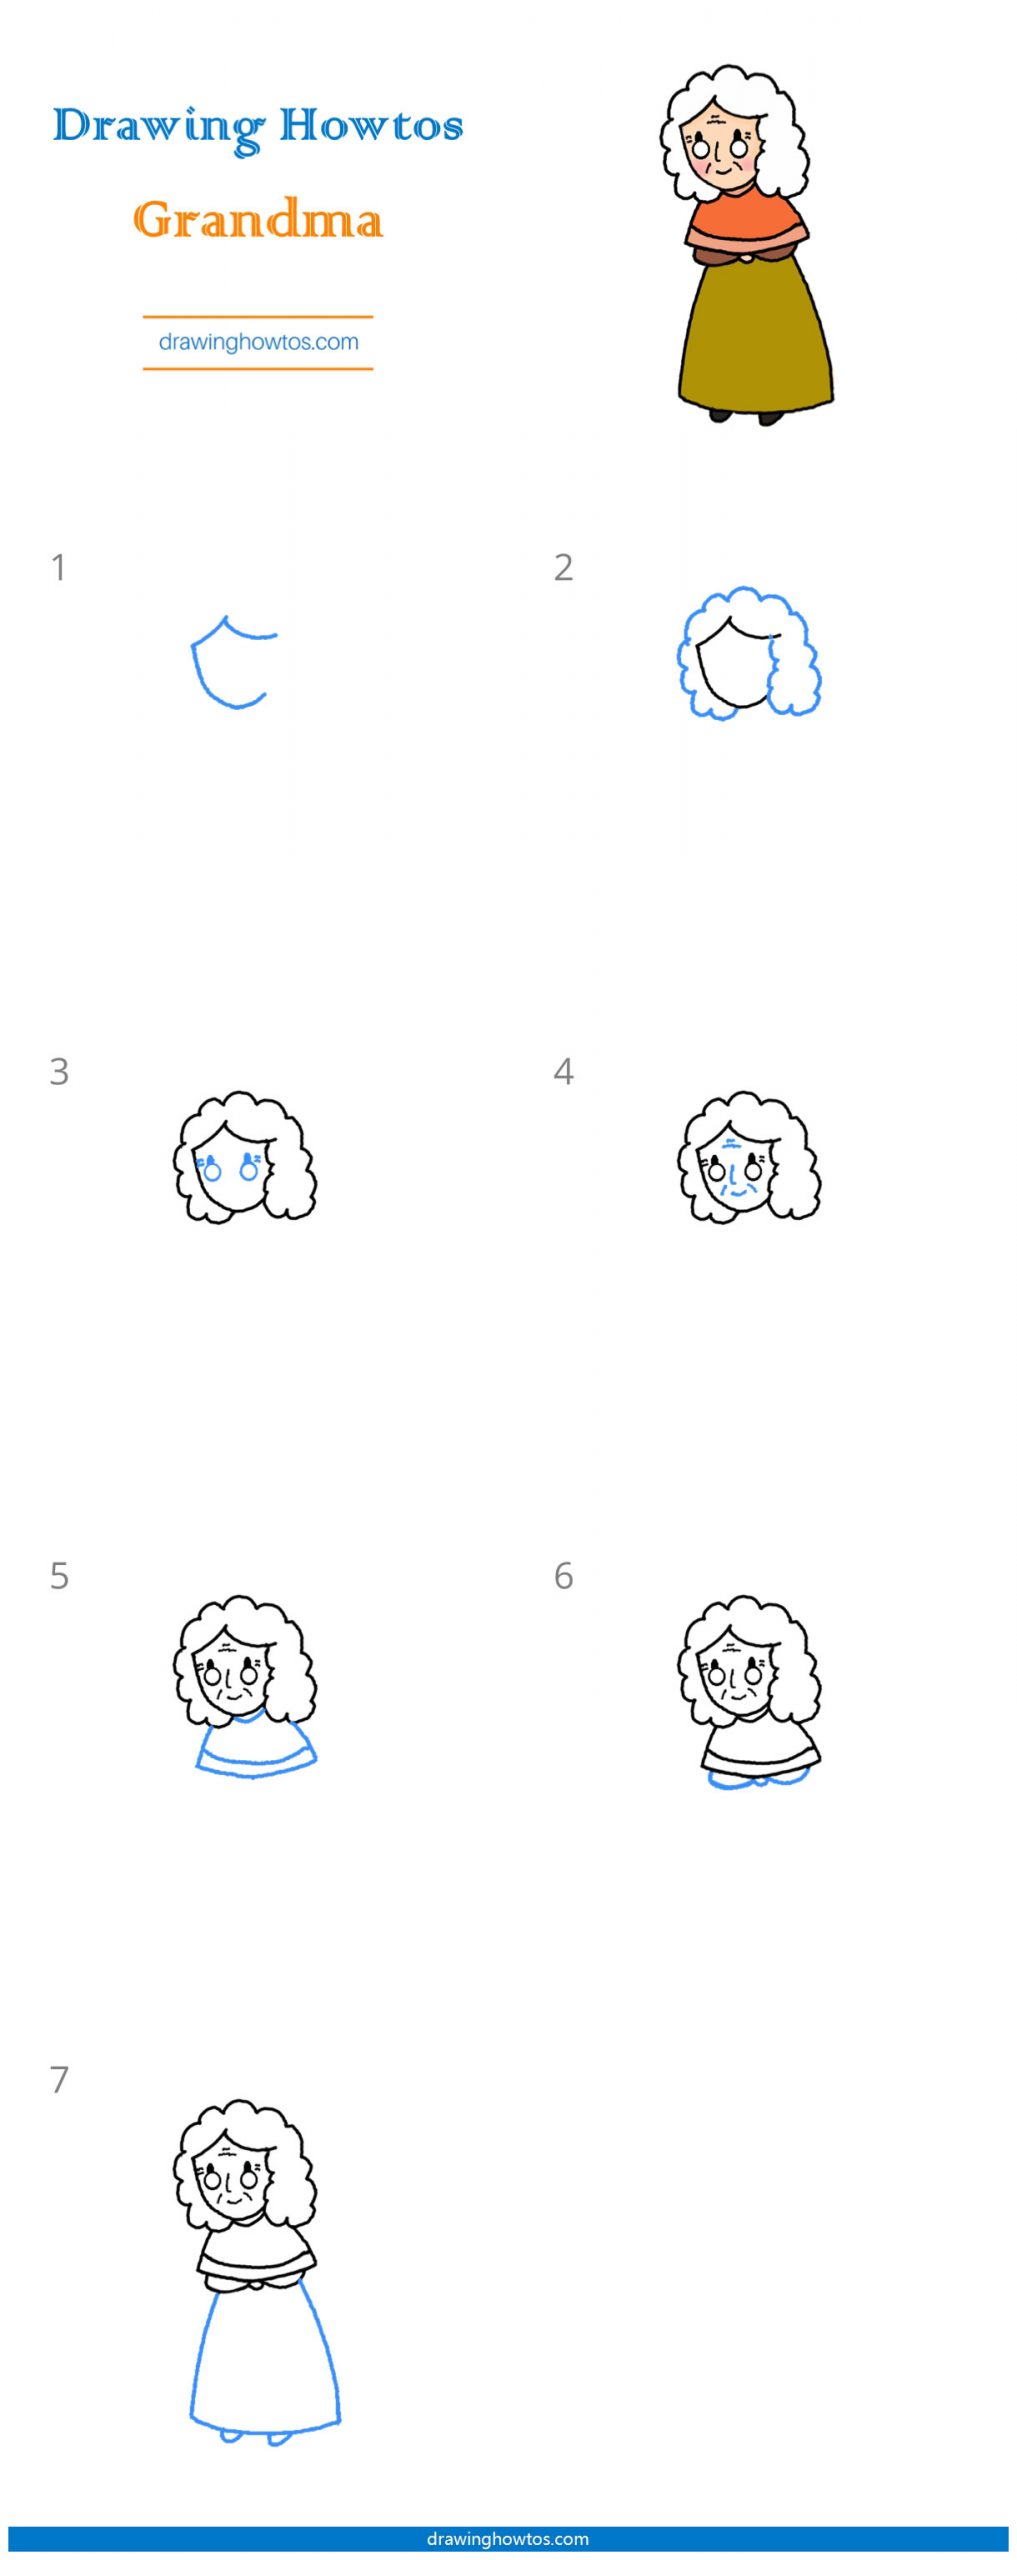 How to Draw a Grandma - Step by Step Easy Drawing Guides - Drawing Howtos